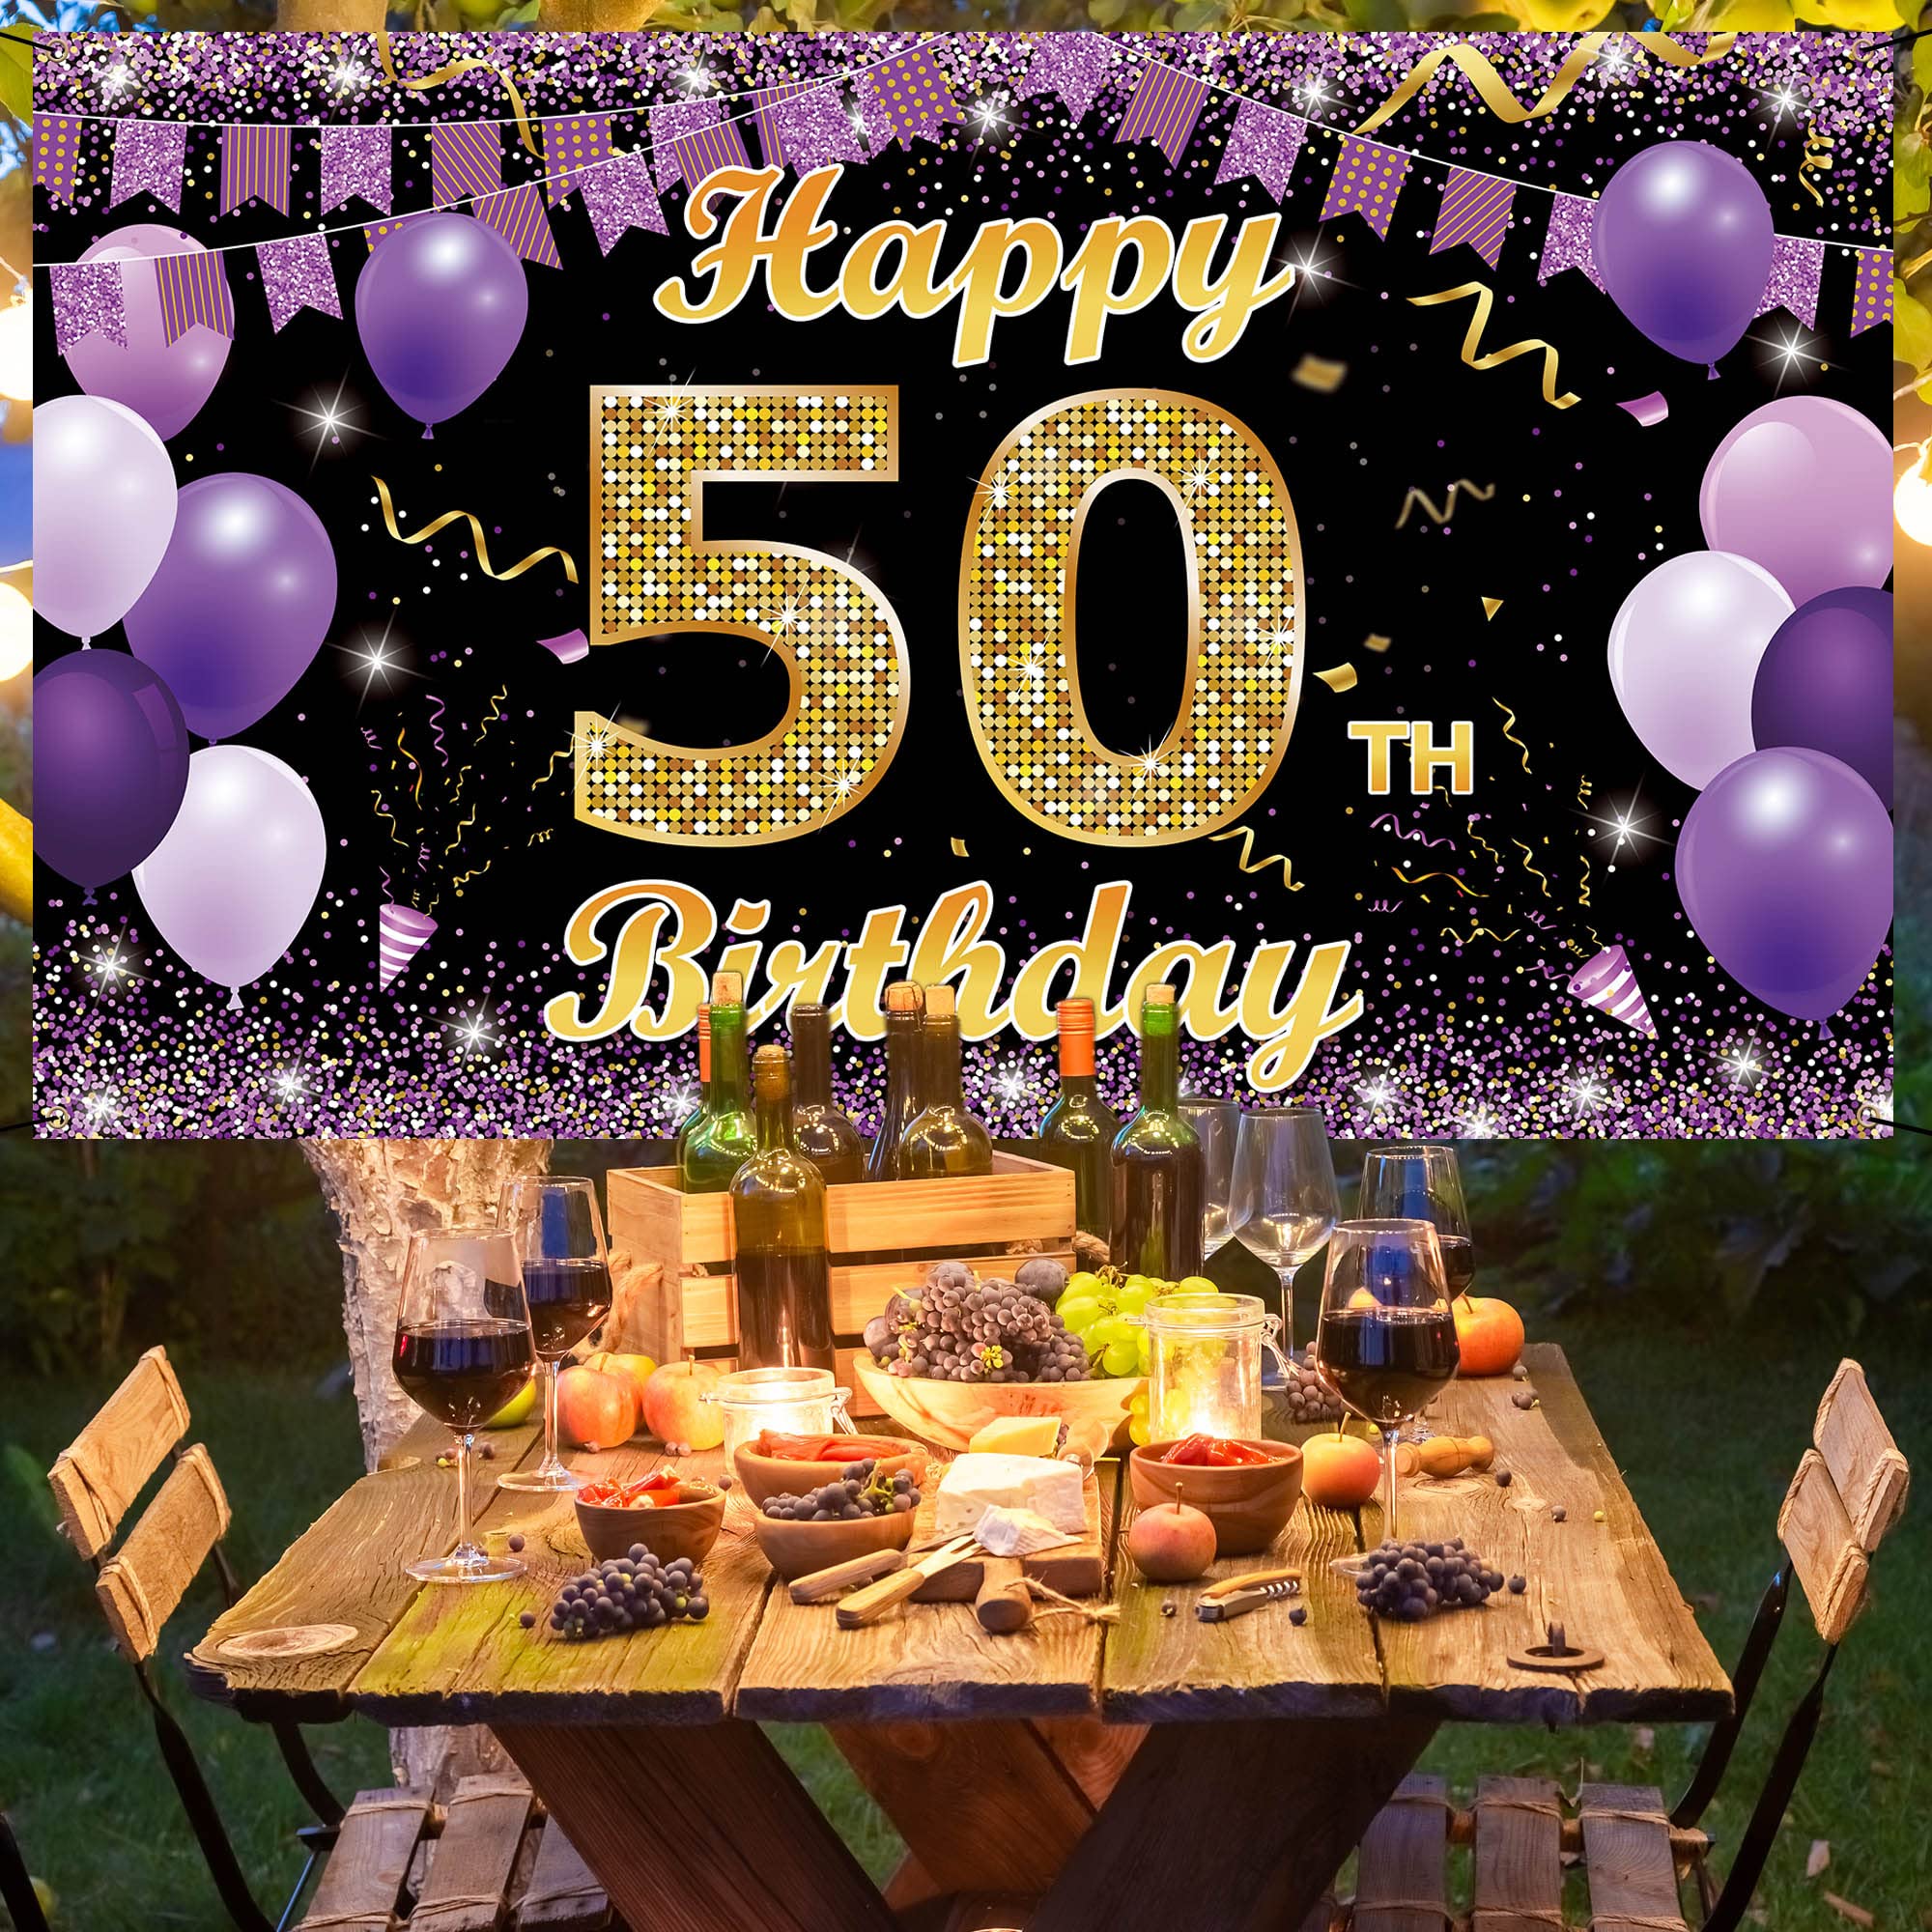 50th Birthday Decorations Backdrop Banner, Happy 50th Birthday Decorations for Her, Gold Purple 50 Birthday Party Photo Backdrop Decor Supplies for Women, Fabric 6.1ft x 3.6ft Vicycaty